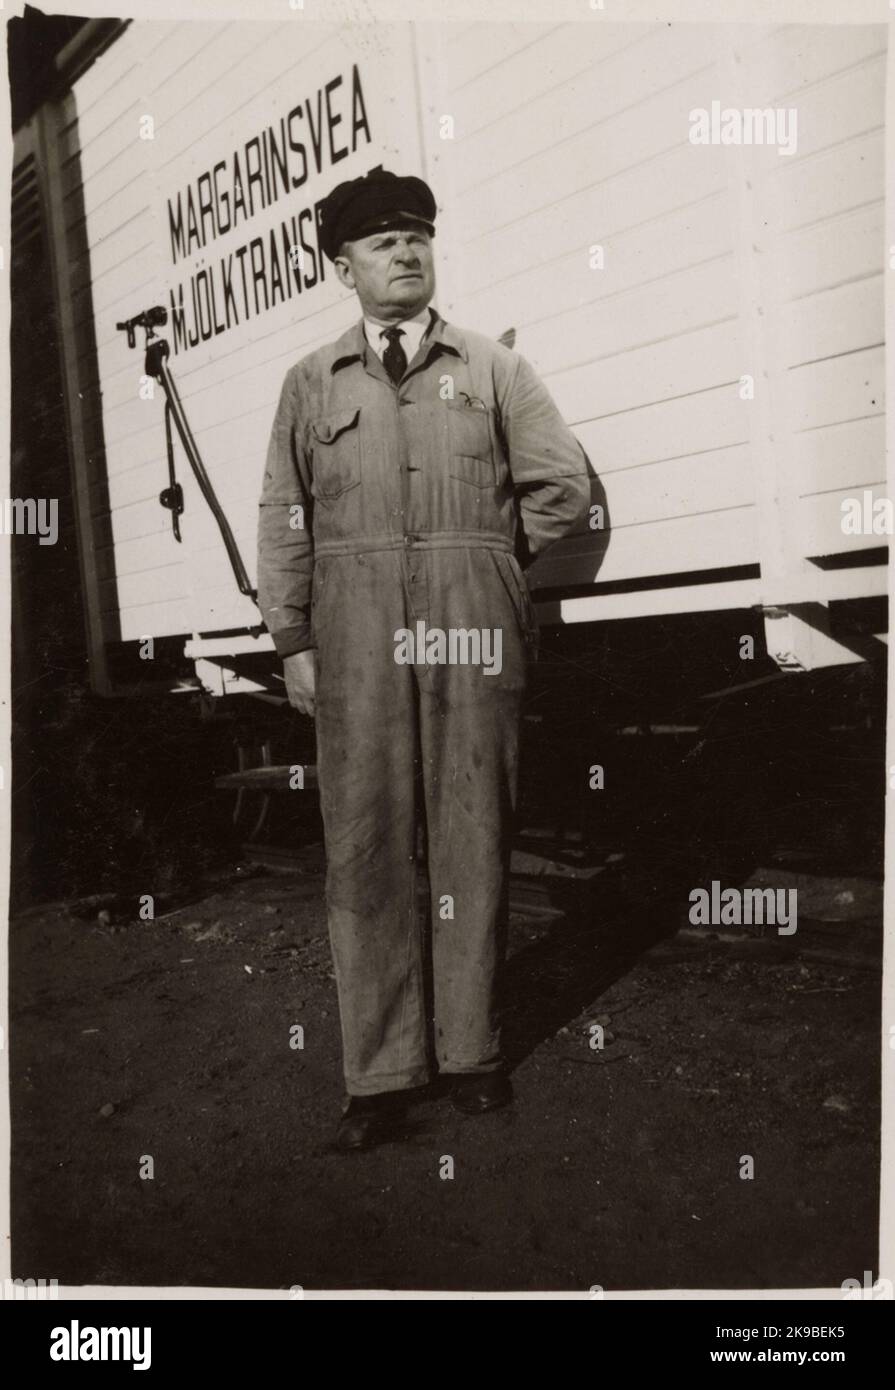 J. F. Adolfson, Kalmar Central, in front of a freight wagon with text 'Margarinsvea milk transport'. Stock Photo